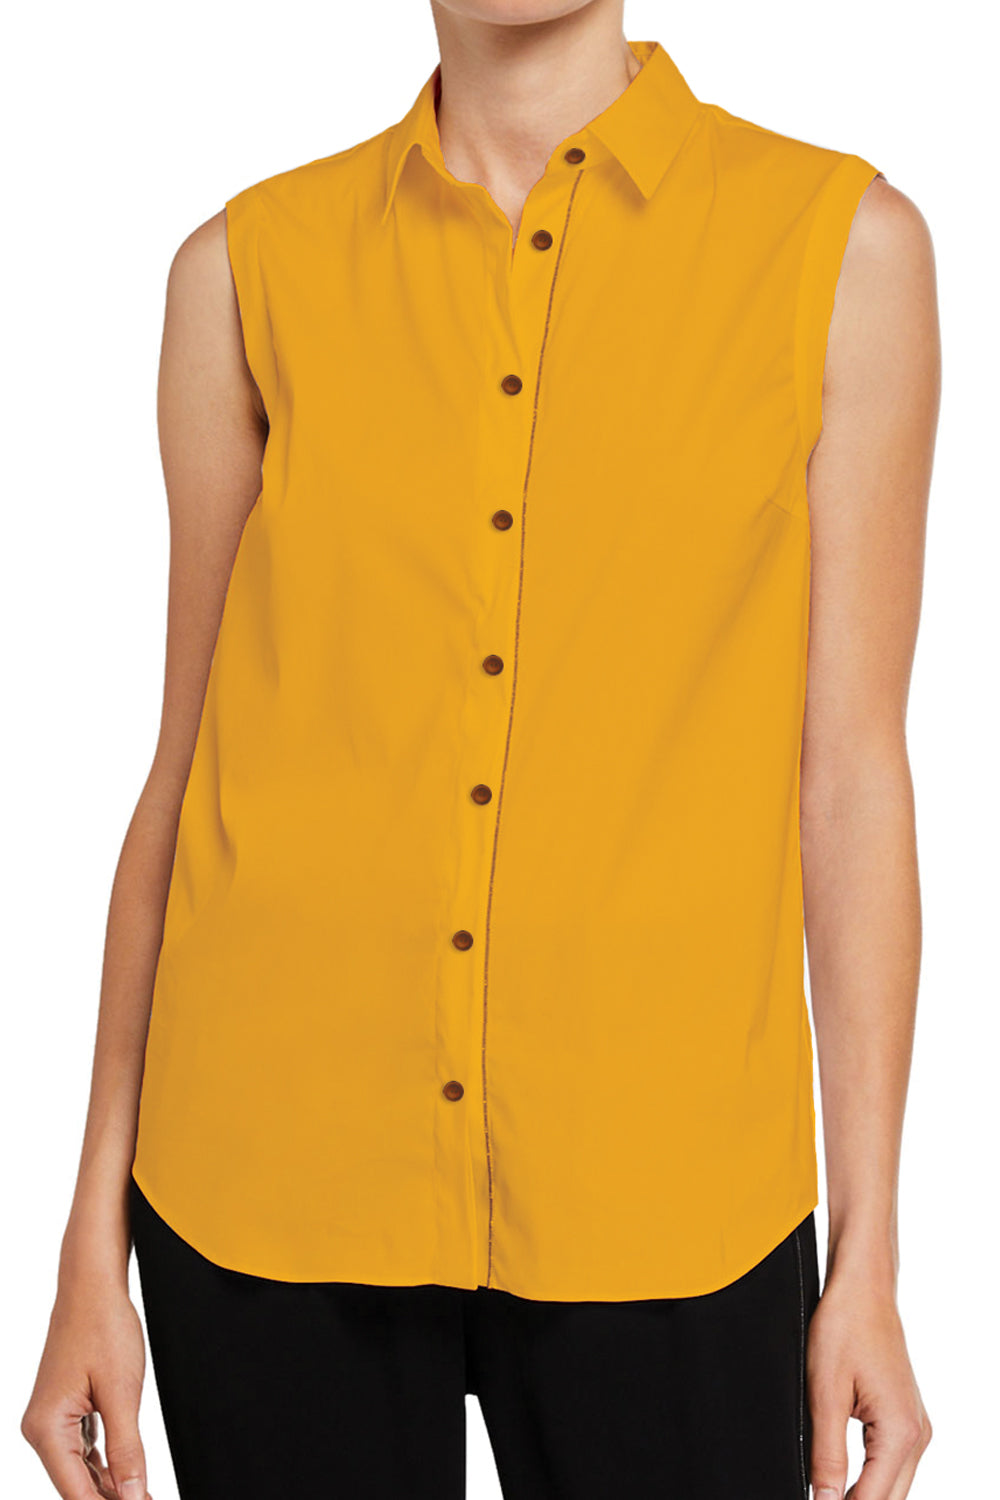 Suime Yellow Top